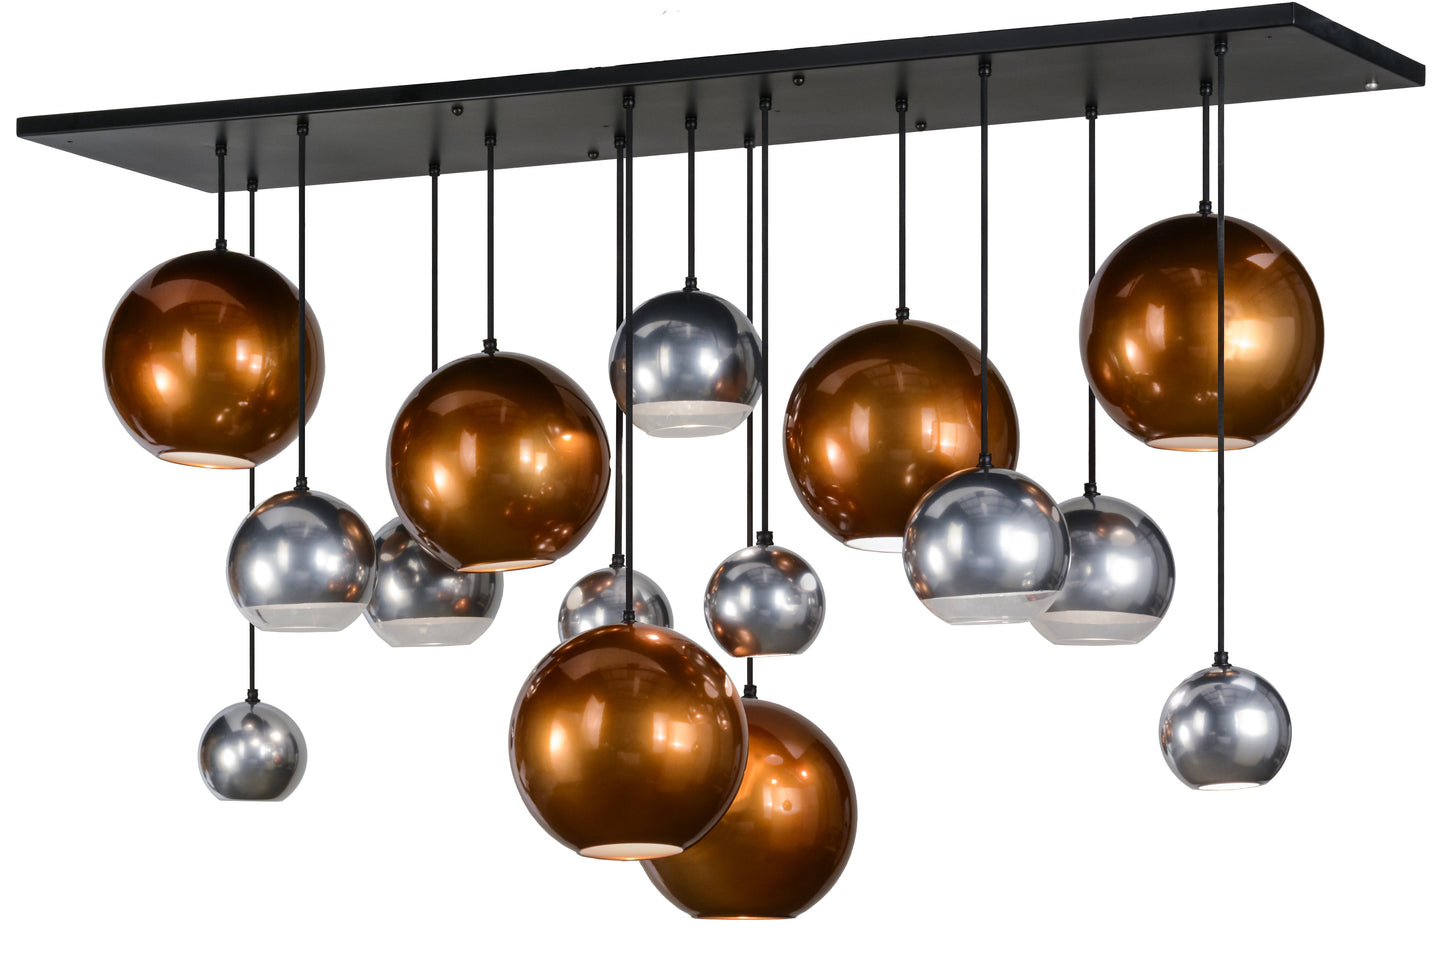 72" Bola Metalica 15-Light Cascading Pendant by 2nd Ave Lighting